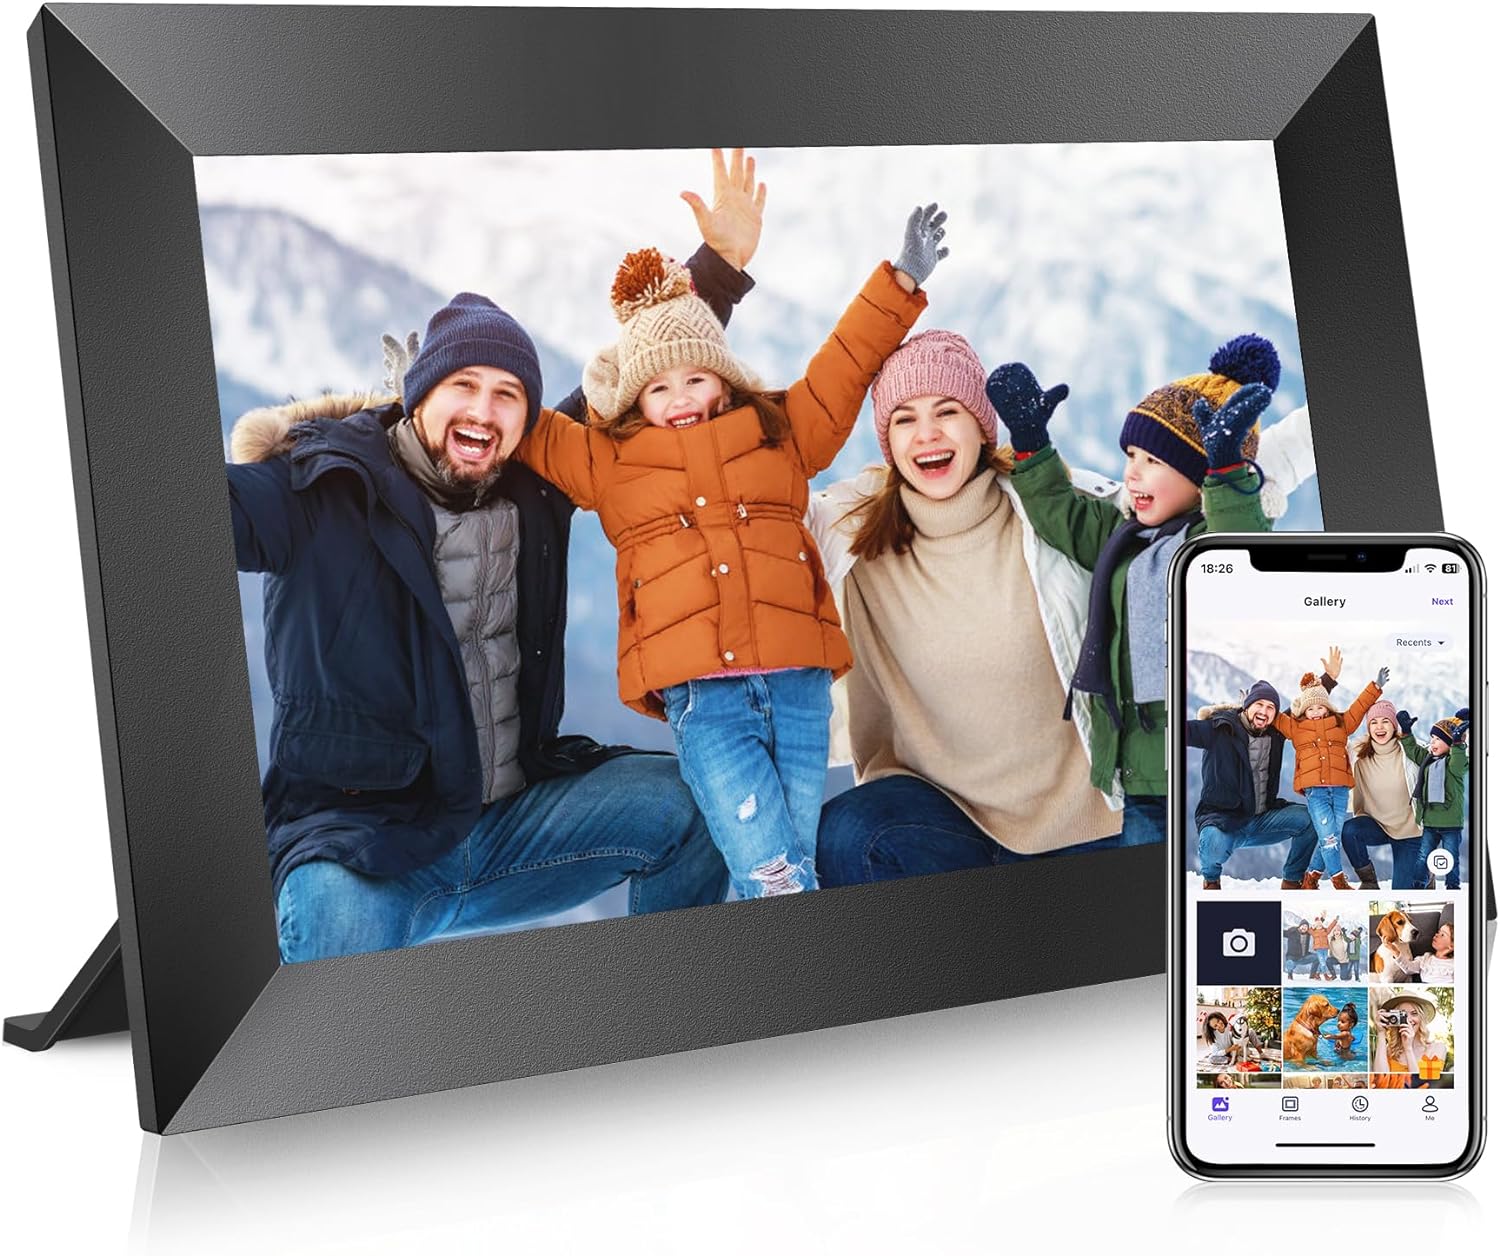 WONNIE 10.1 Inch WiFi Digital Picture Frame Review